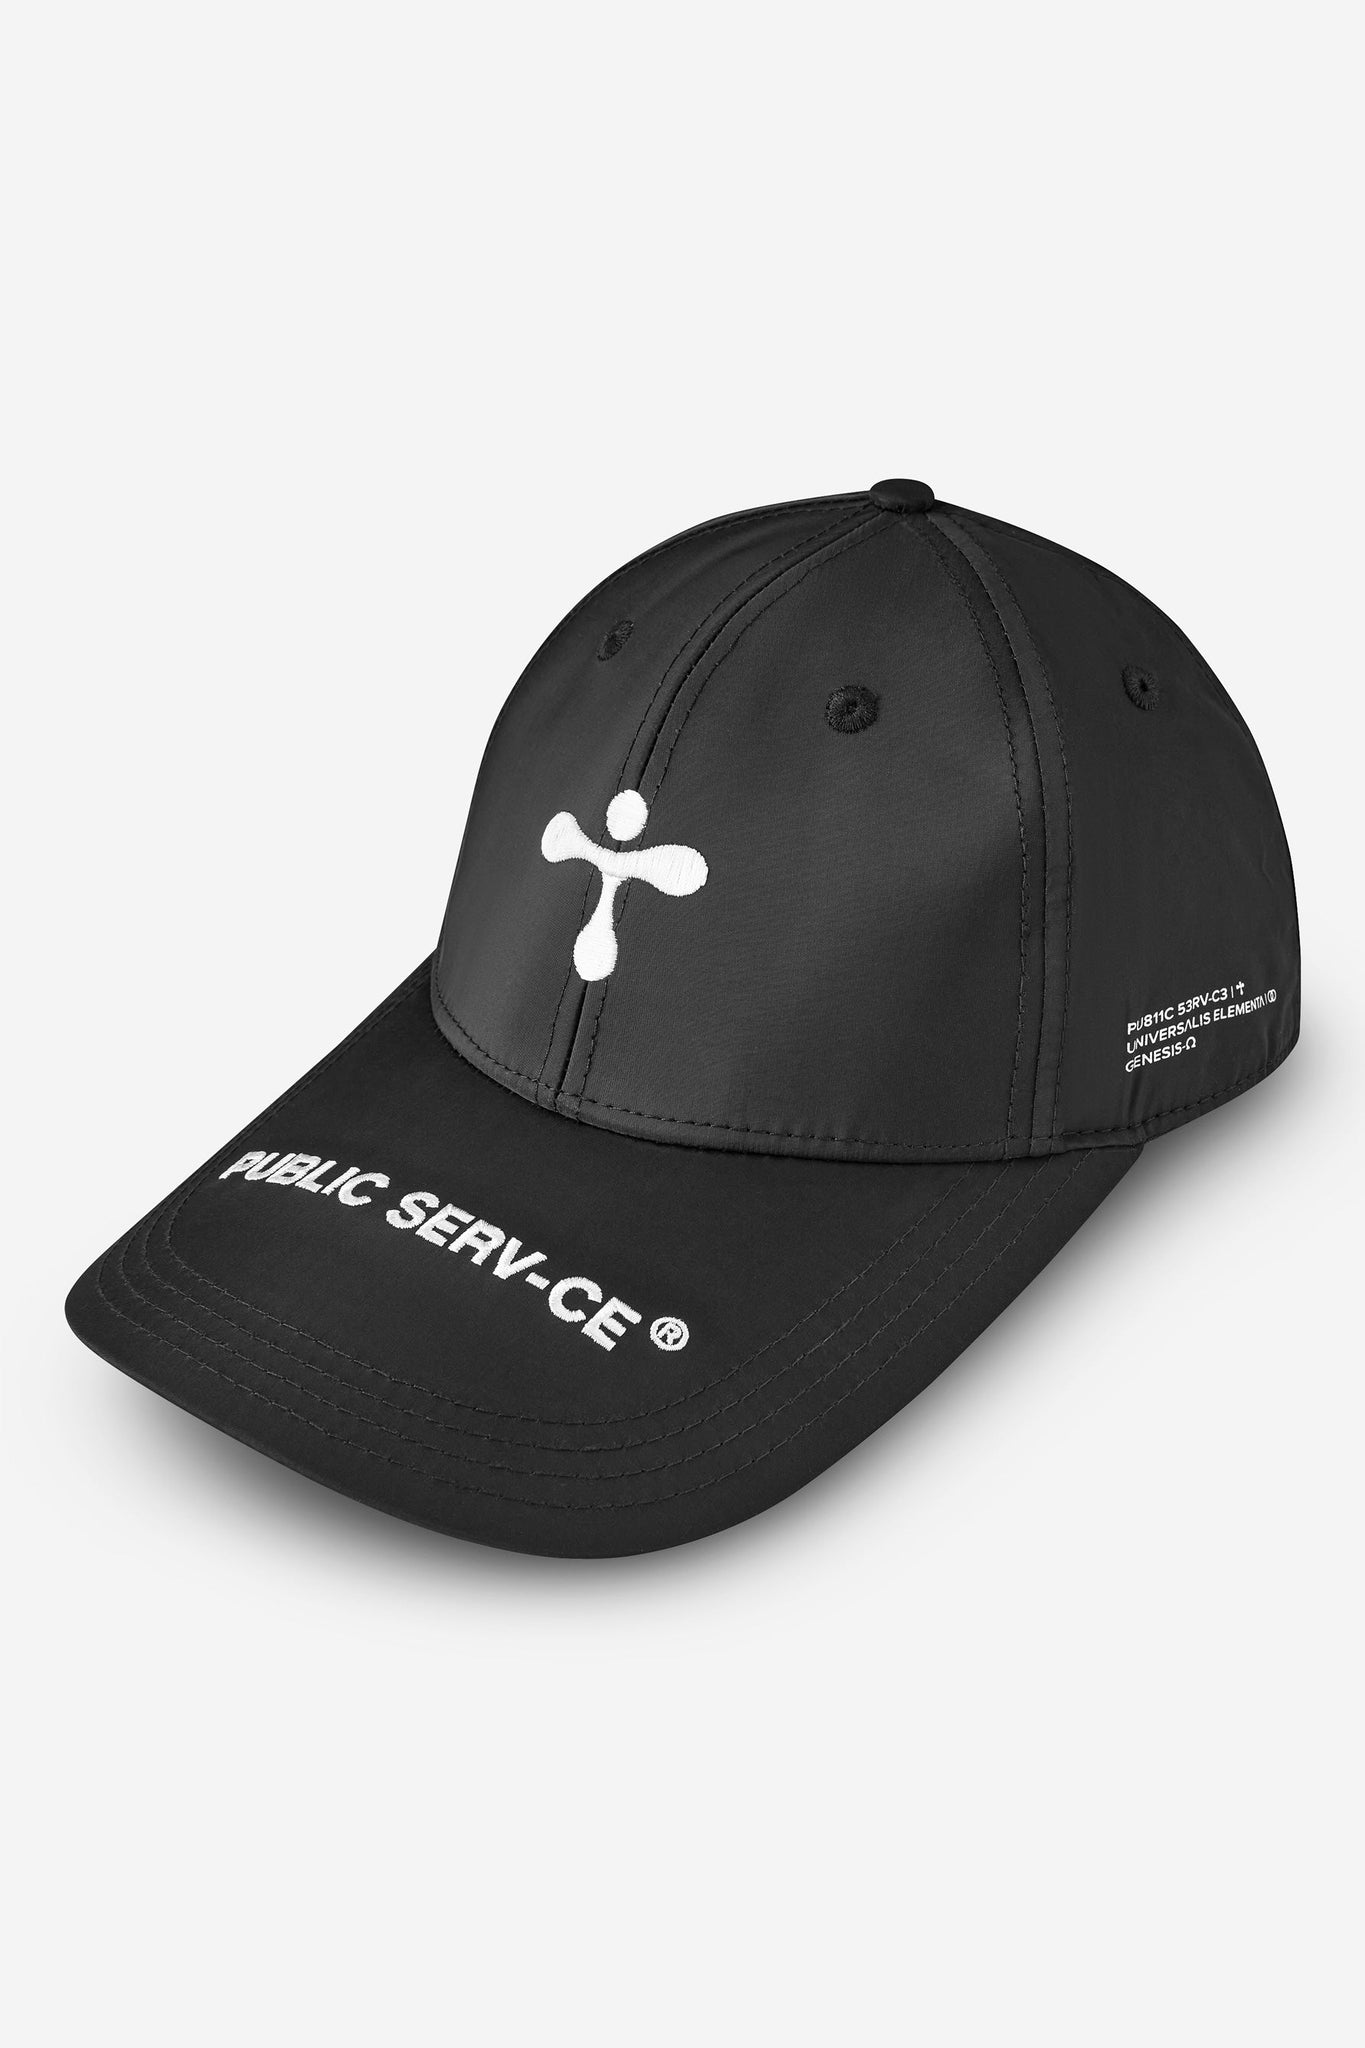 alt="3/4 close up of black cap with 3D stitching, elongated visor and contrast prints"